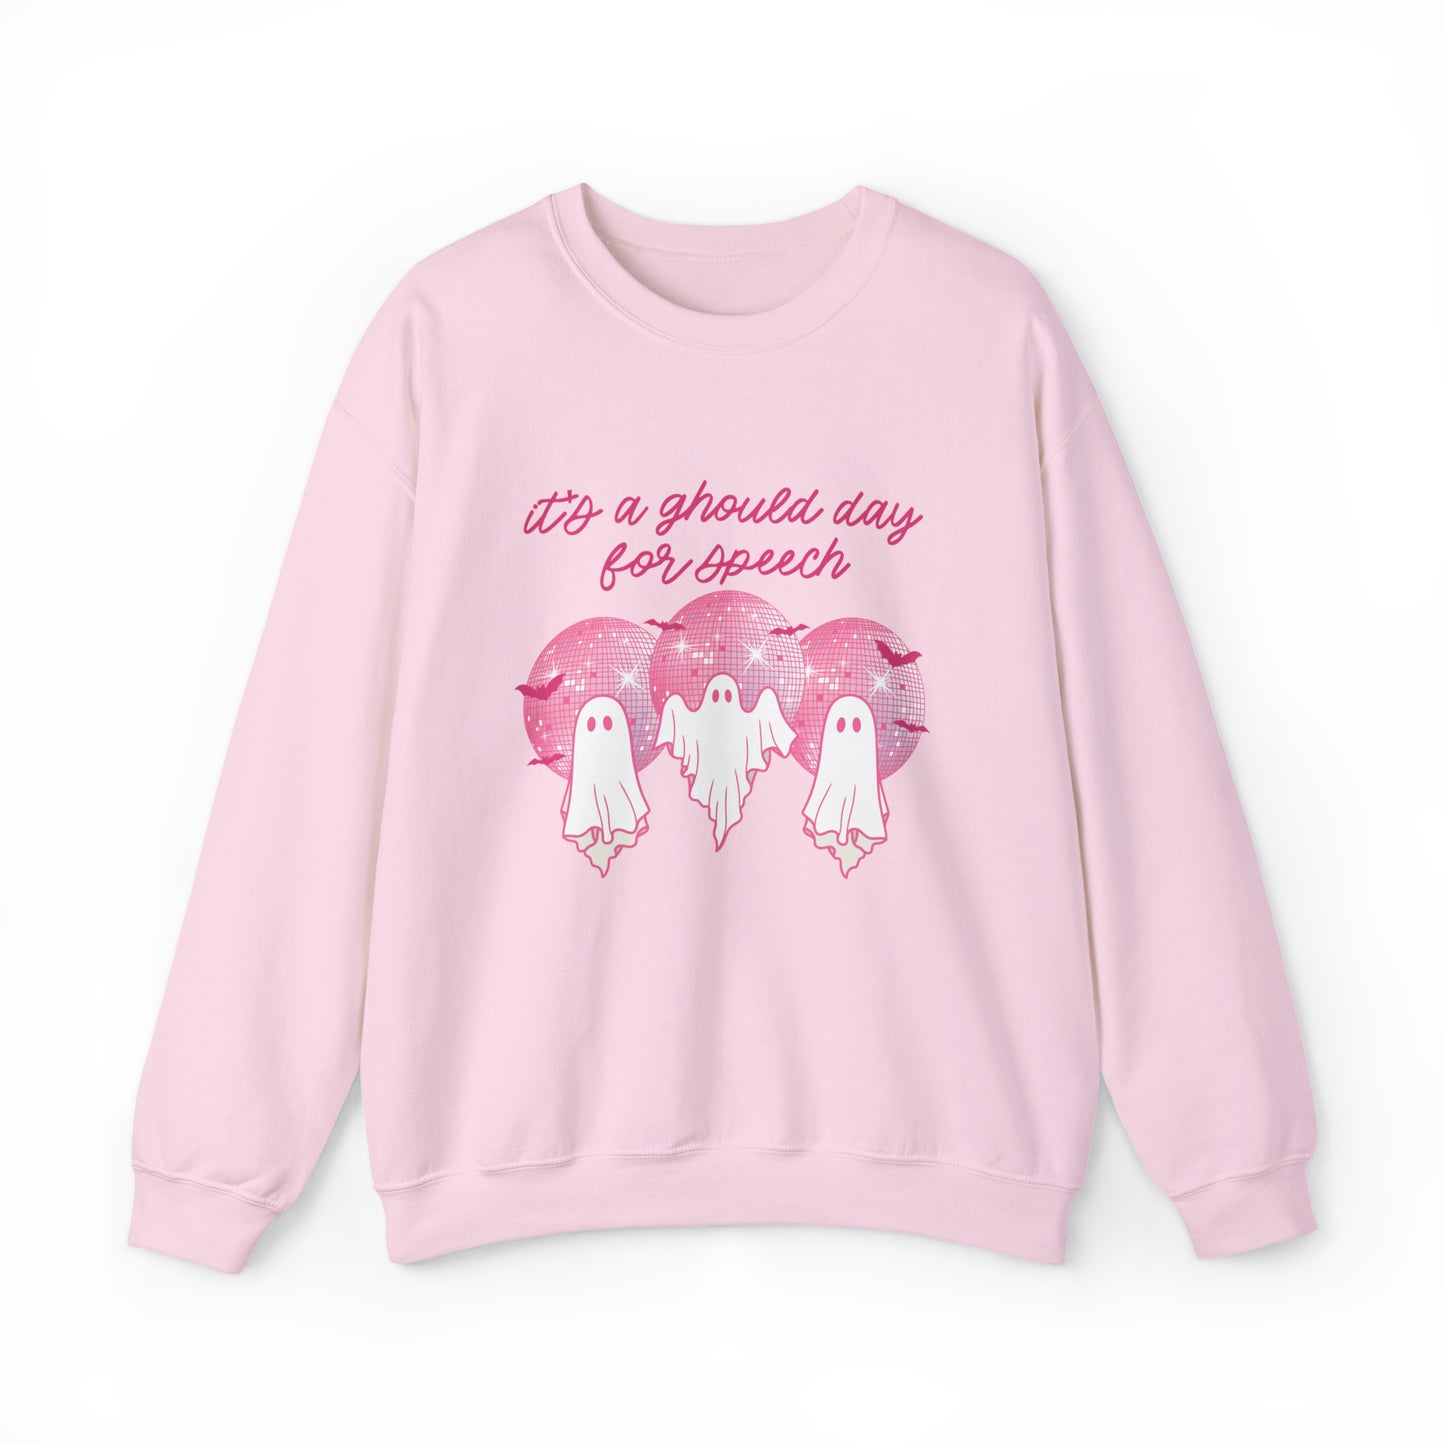 It's a Ghould Day for Speech Crewneck Sweatshirt